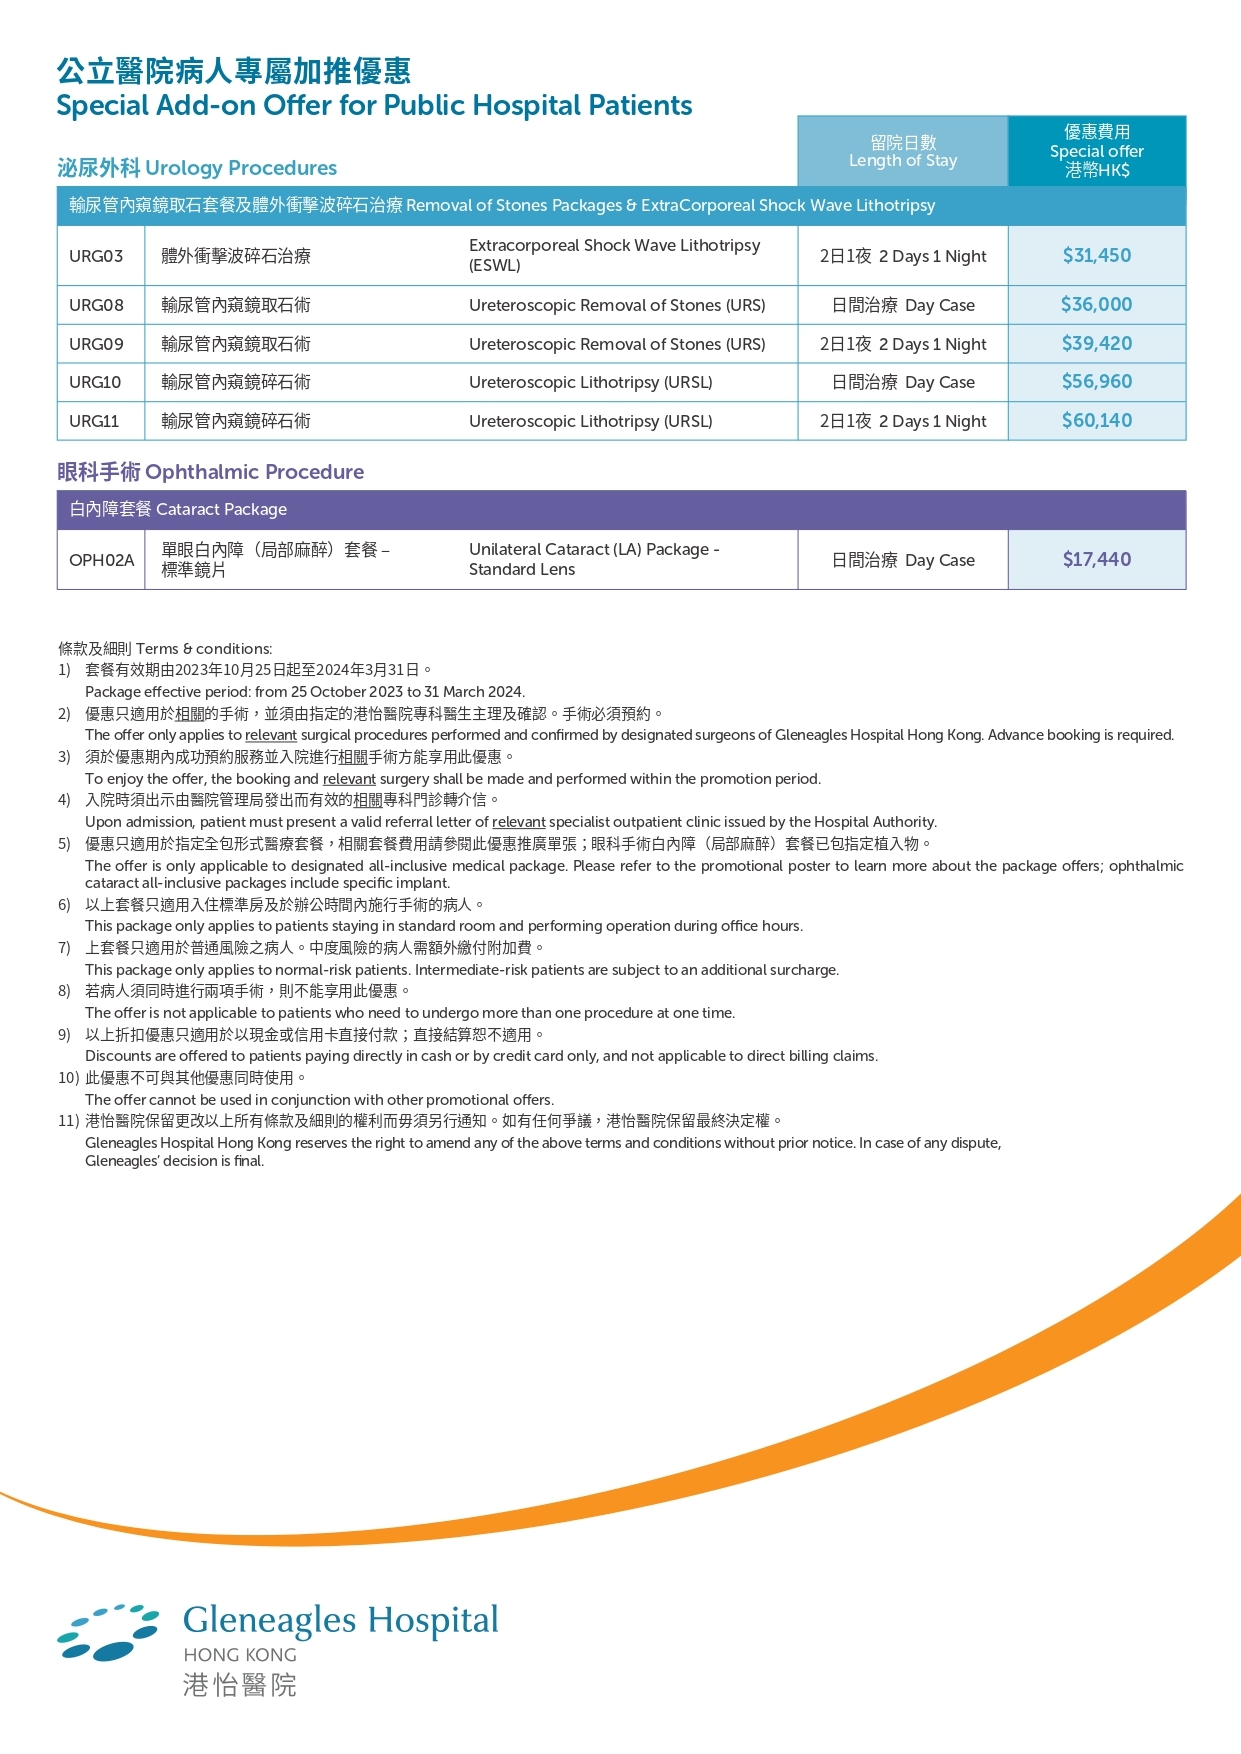 HA-Referral-All-inclusive-Packages-Add-on-Offer-leaflet-05-1_page-0002.jpg#asset:269904